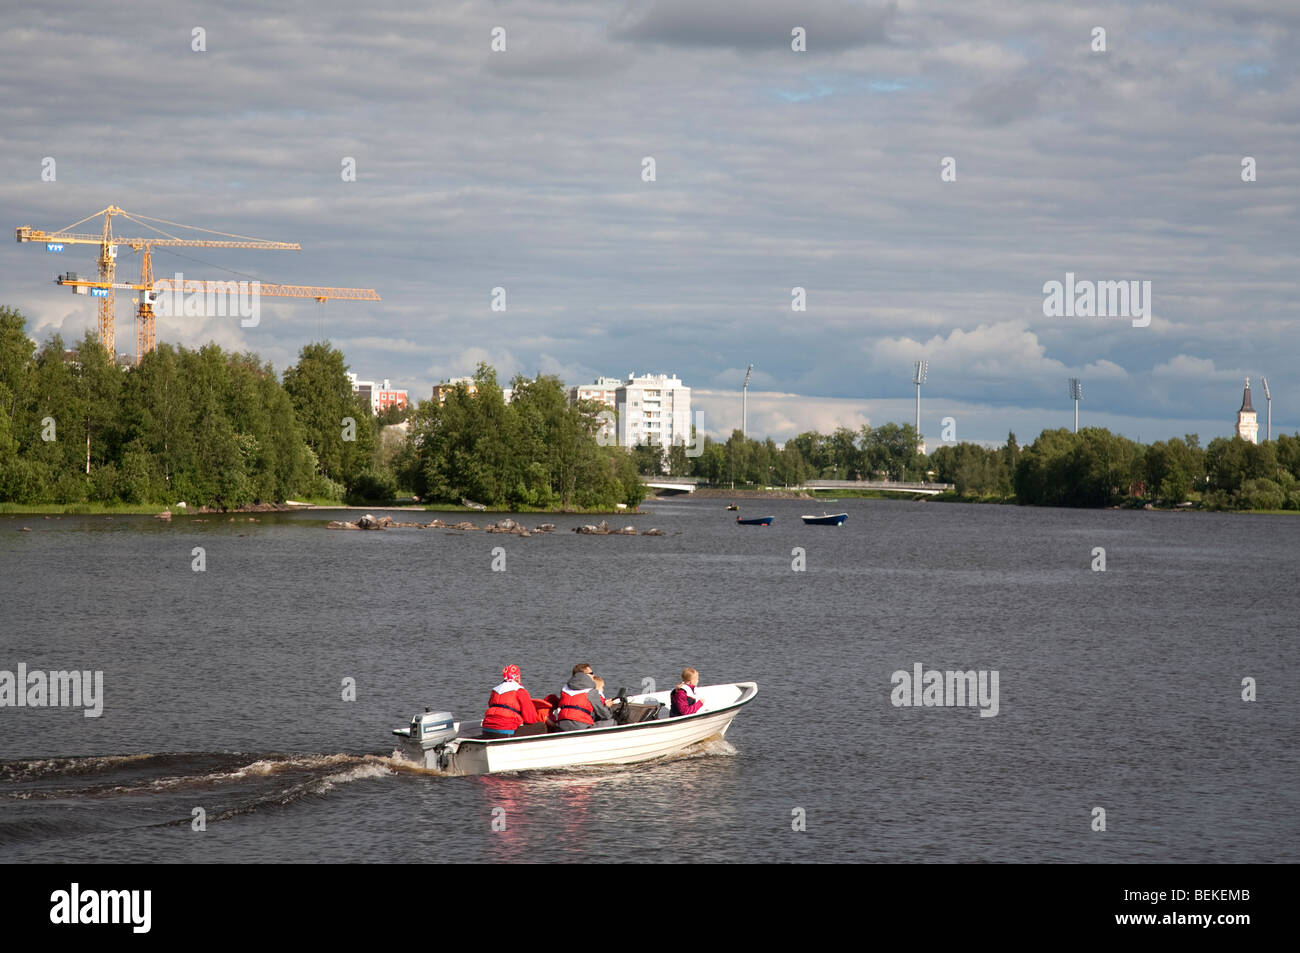 Family boating with a skiff at River Oulujoki Oulu Hartaanselkä Finland Stock Photo